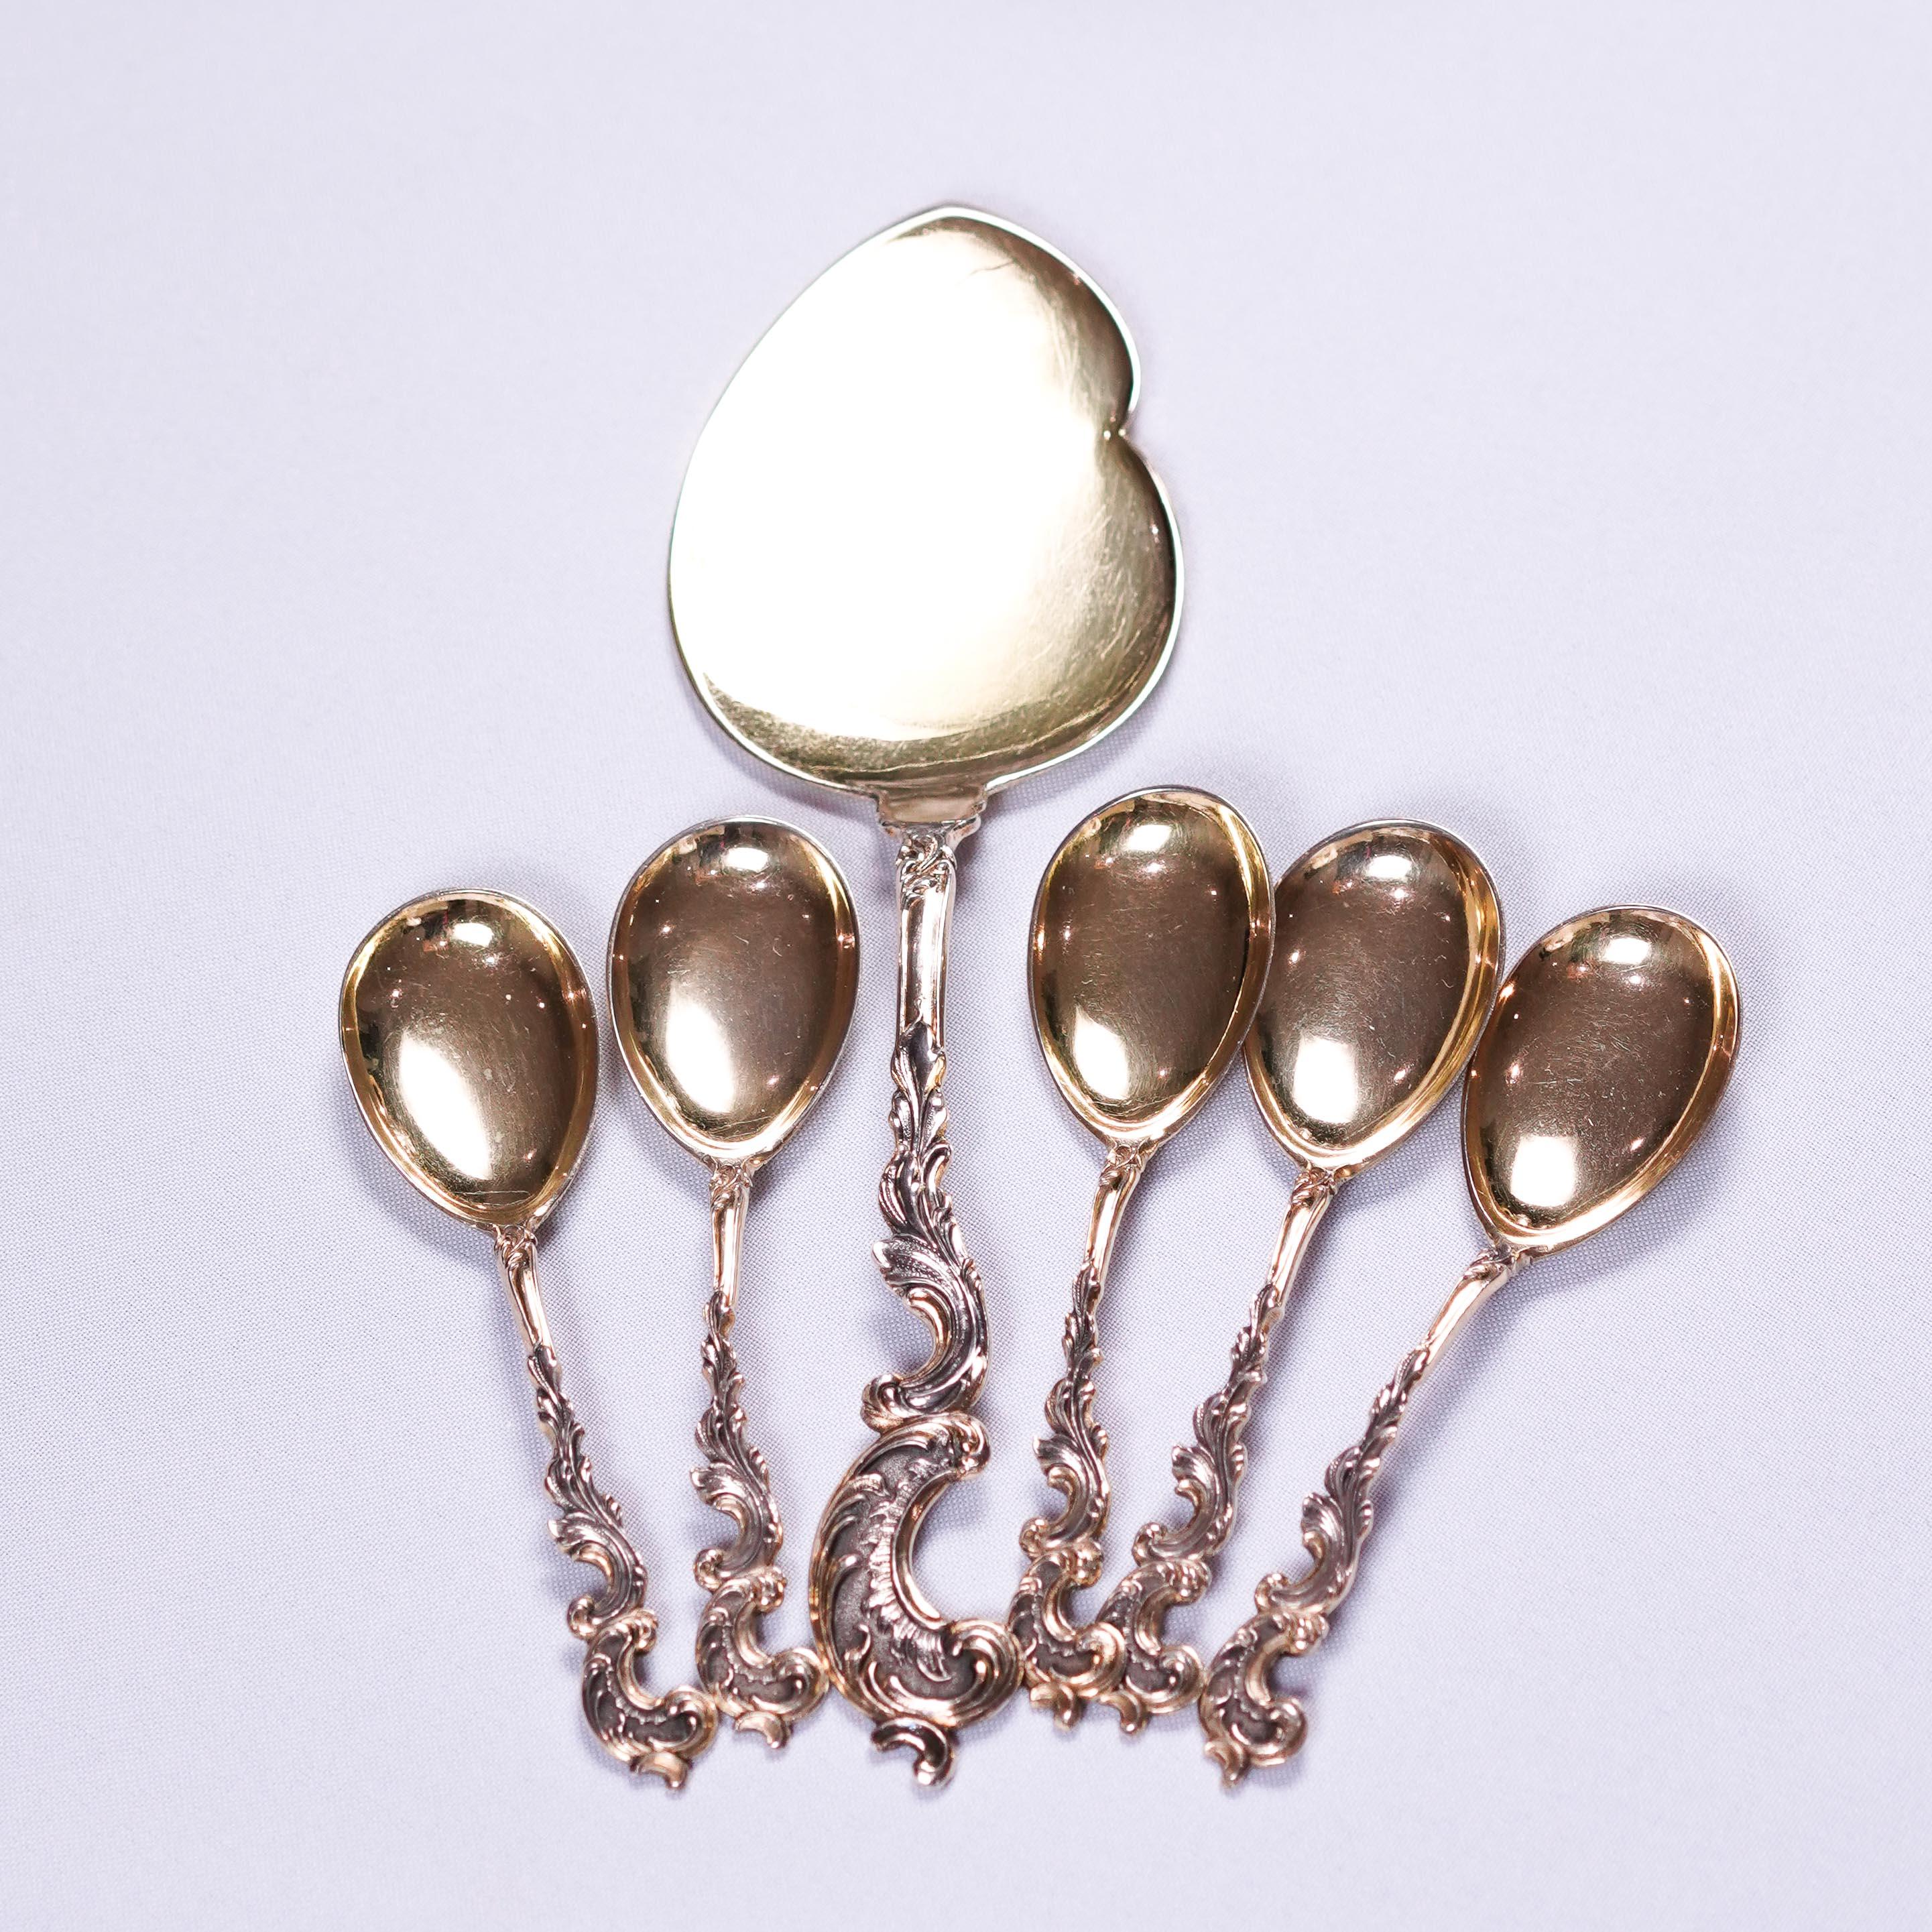 Antique German Solid Silver Icecream Server & Spoons in Rococo Style - c.1900 In Good Condition For Sale In London, GB